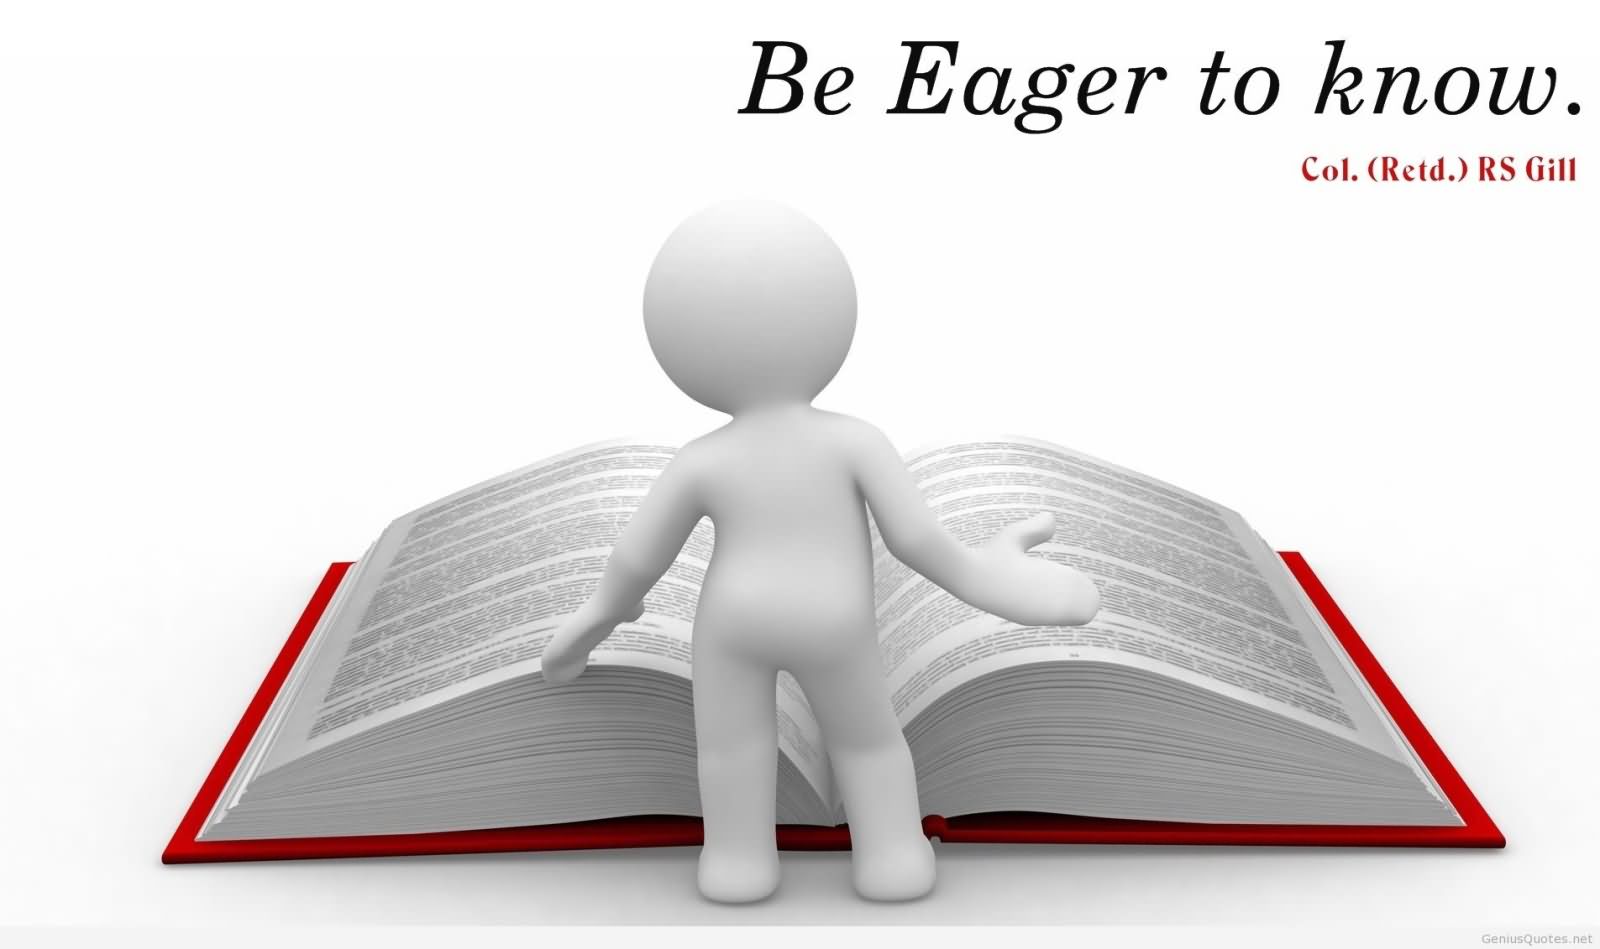 Be eager to know - Col. R. S. Gill